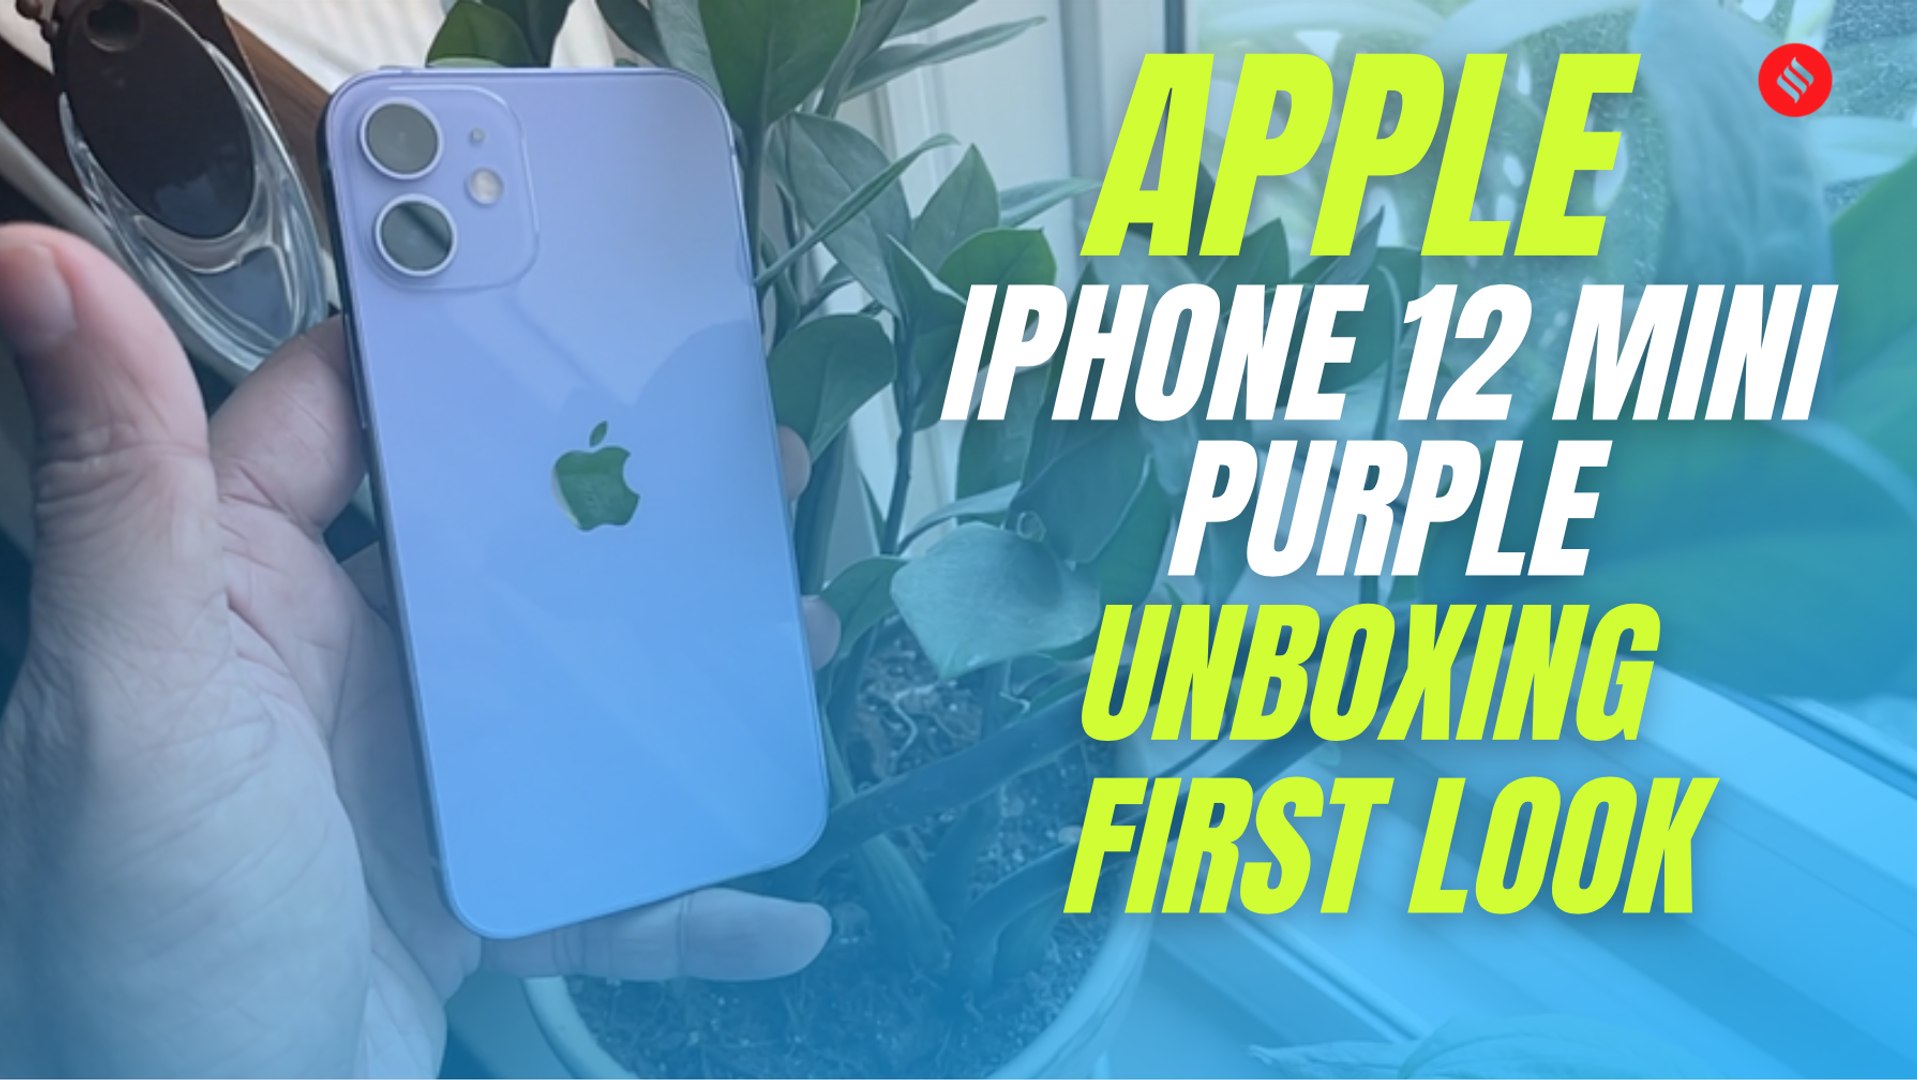 Apple iPhone 12 Mini purple unboxing, first look - video Dailymotion